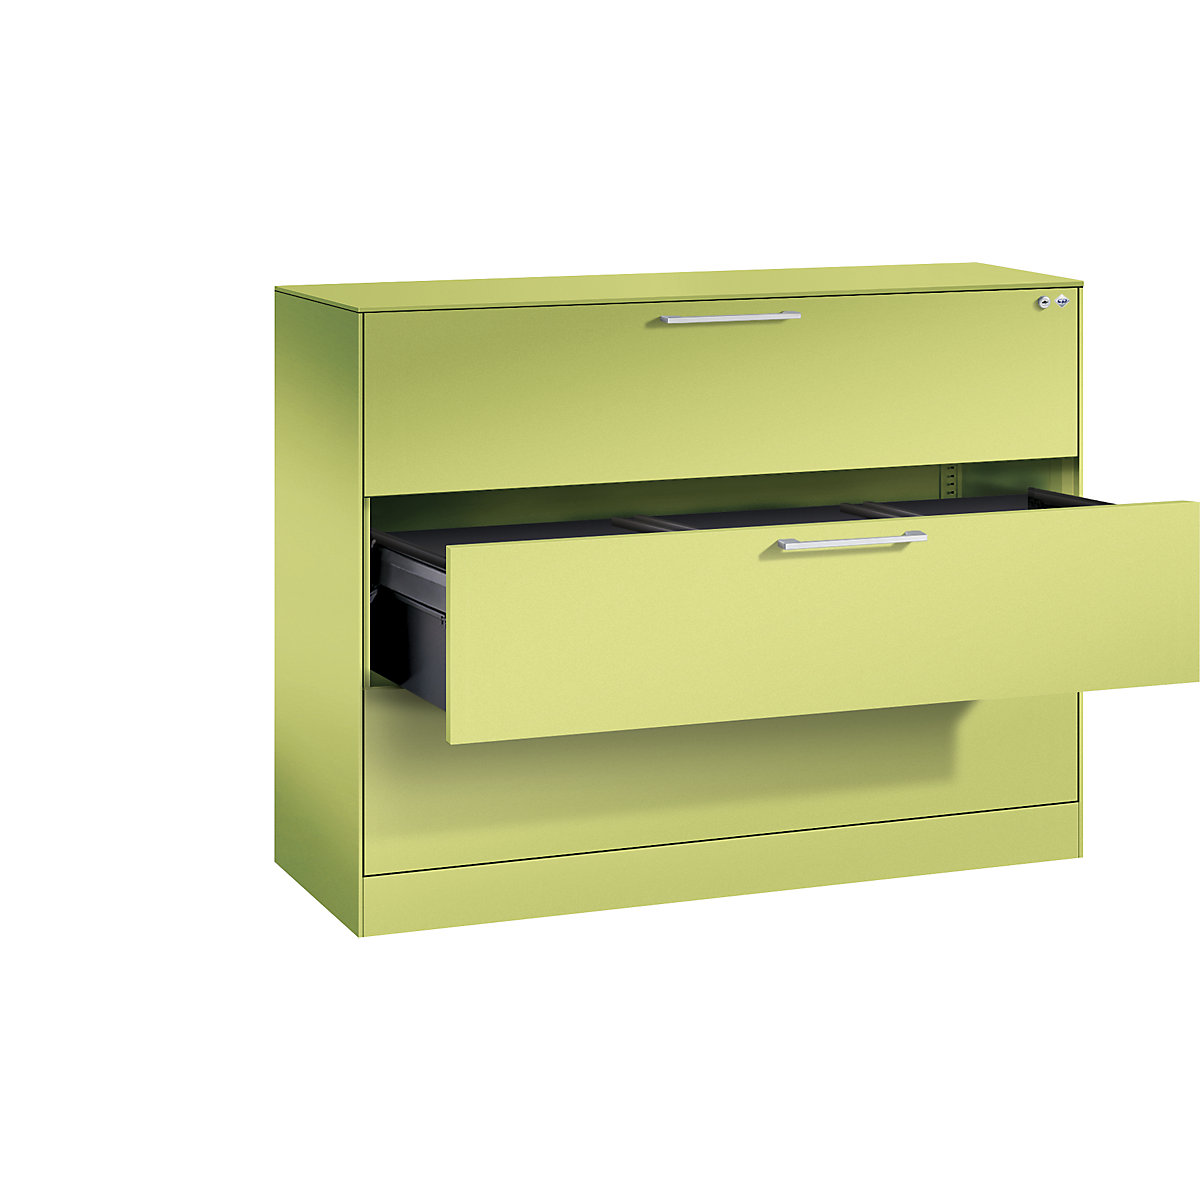 ASISTO suspension filing cabinet – C+P, width 1200 mm, with 3 drawers, viridian green/viridian green-4